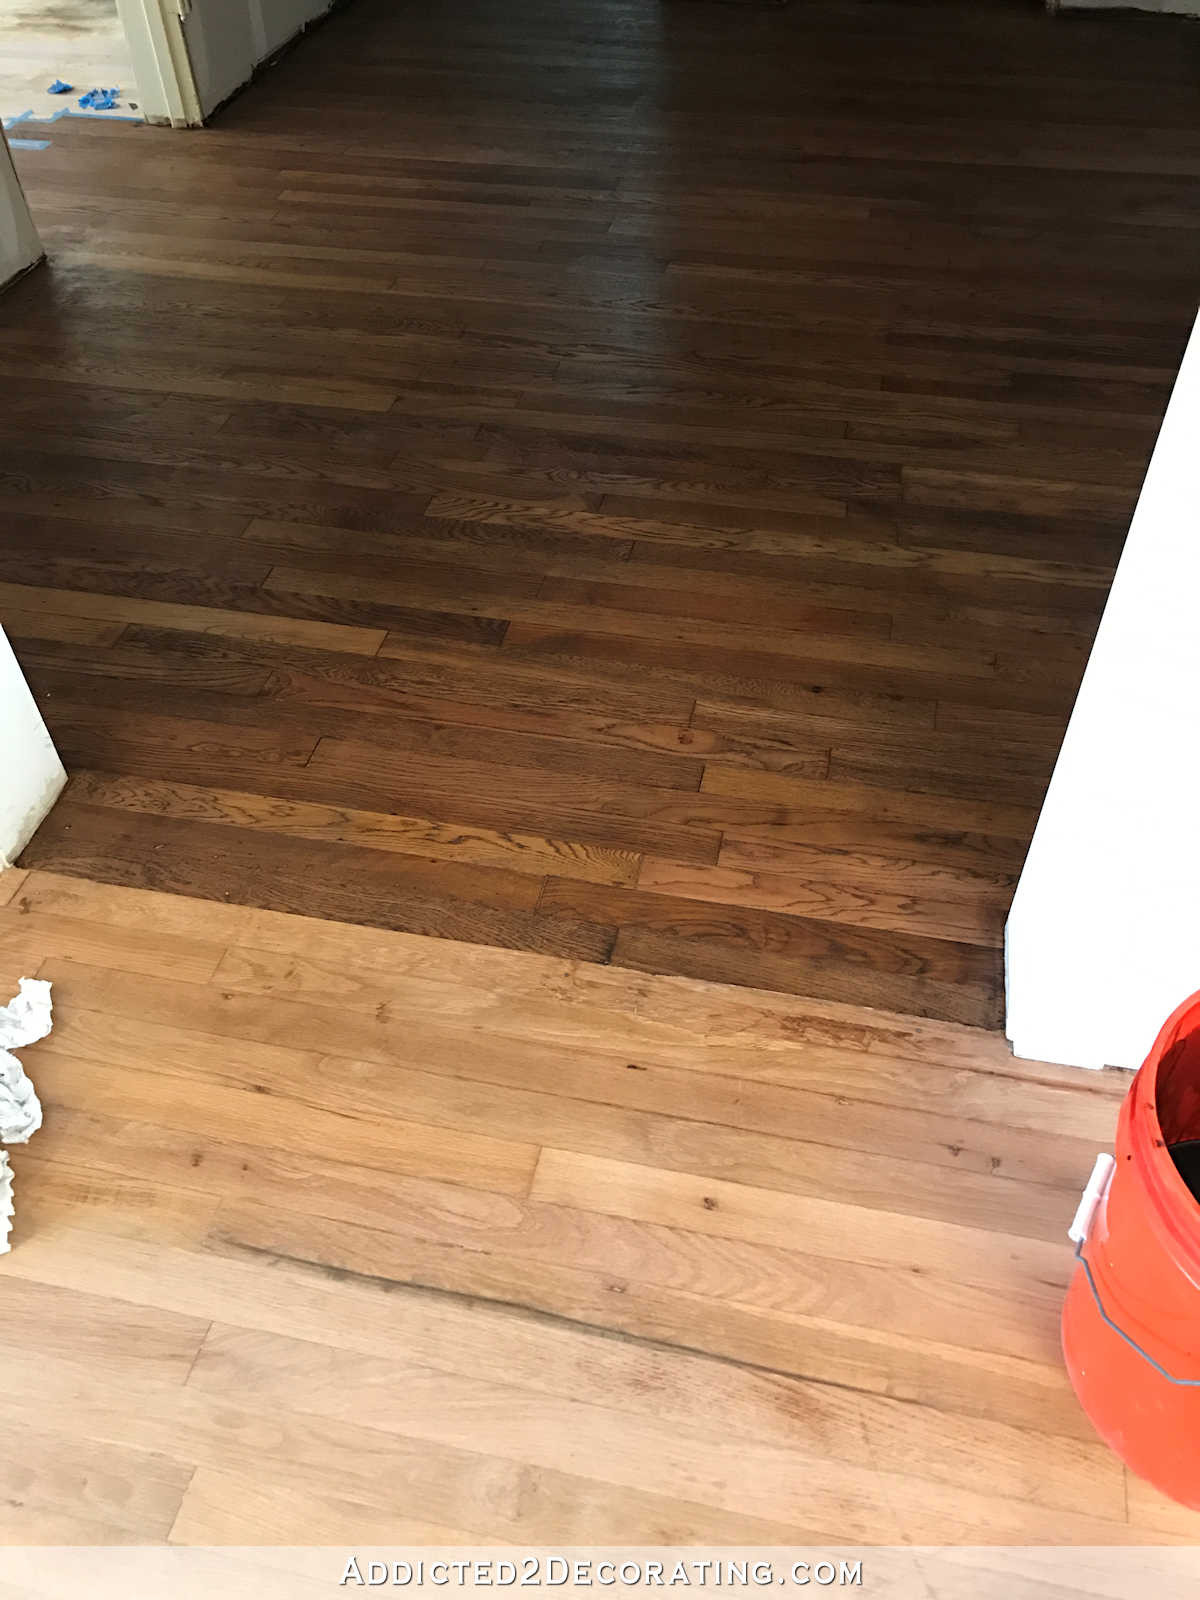 2 different color hardwood floors of adventures in staining my red oak hardwood floors products process pertaining to staining red oak hardwood floors 2 tape off one section at a time for